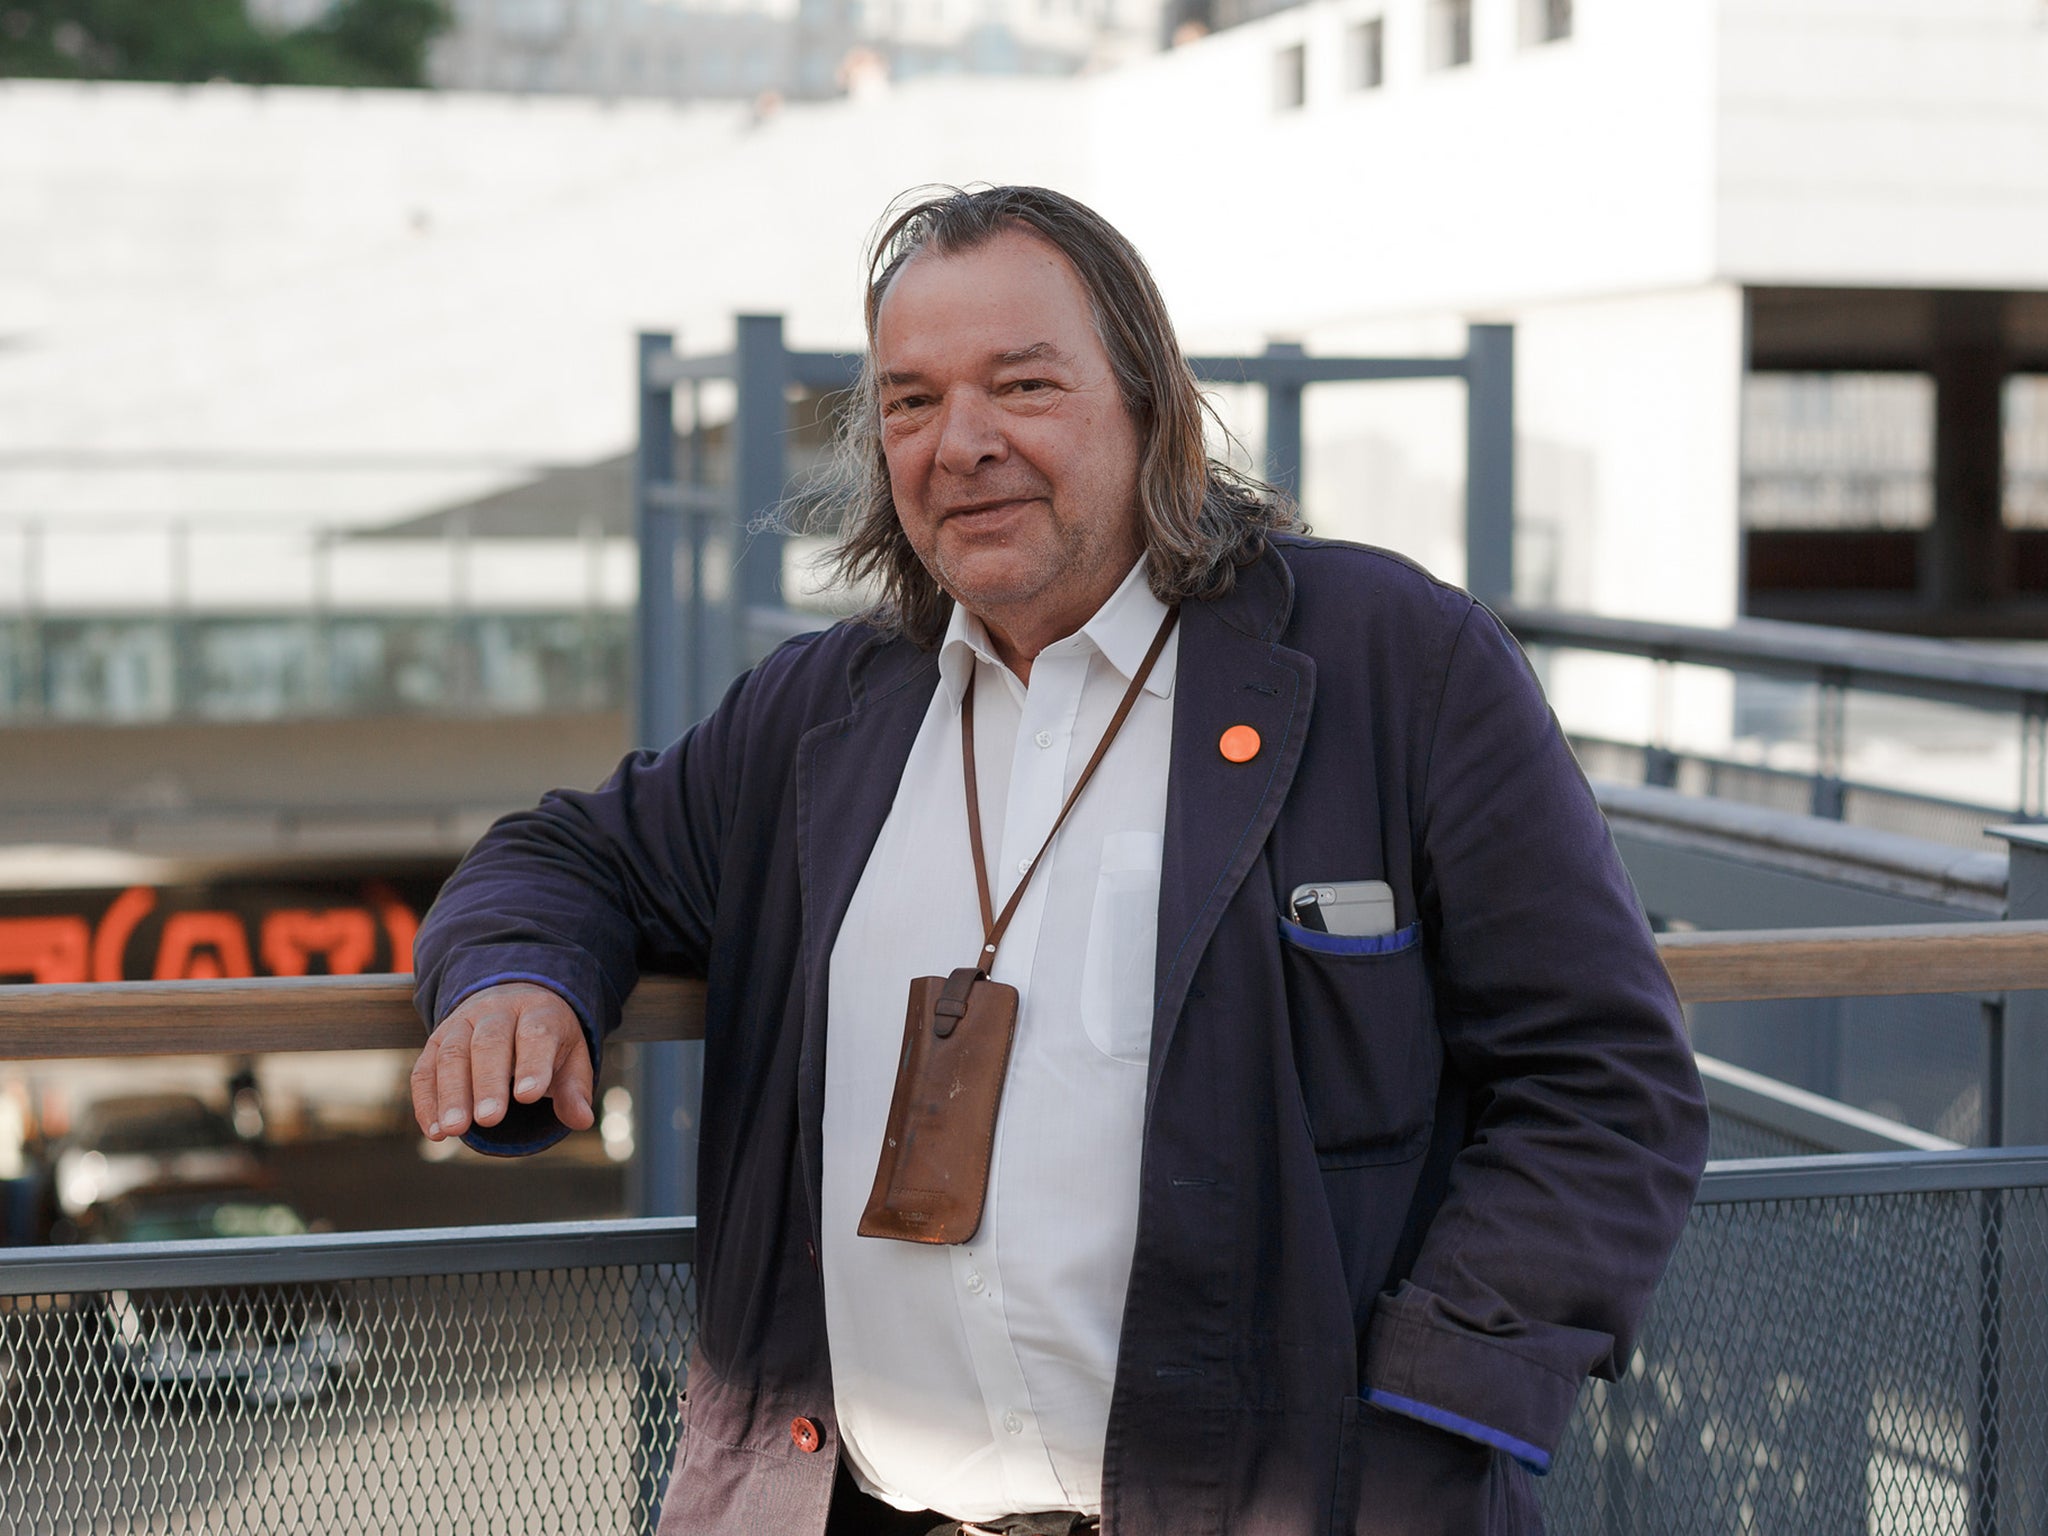 Will Alsop in 2015 at the 'Supercity and bureaucracy in architecture' lecture in Moscow